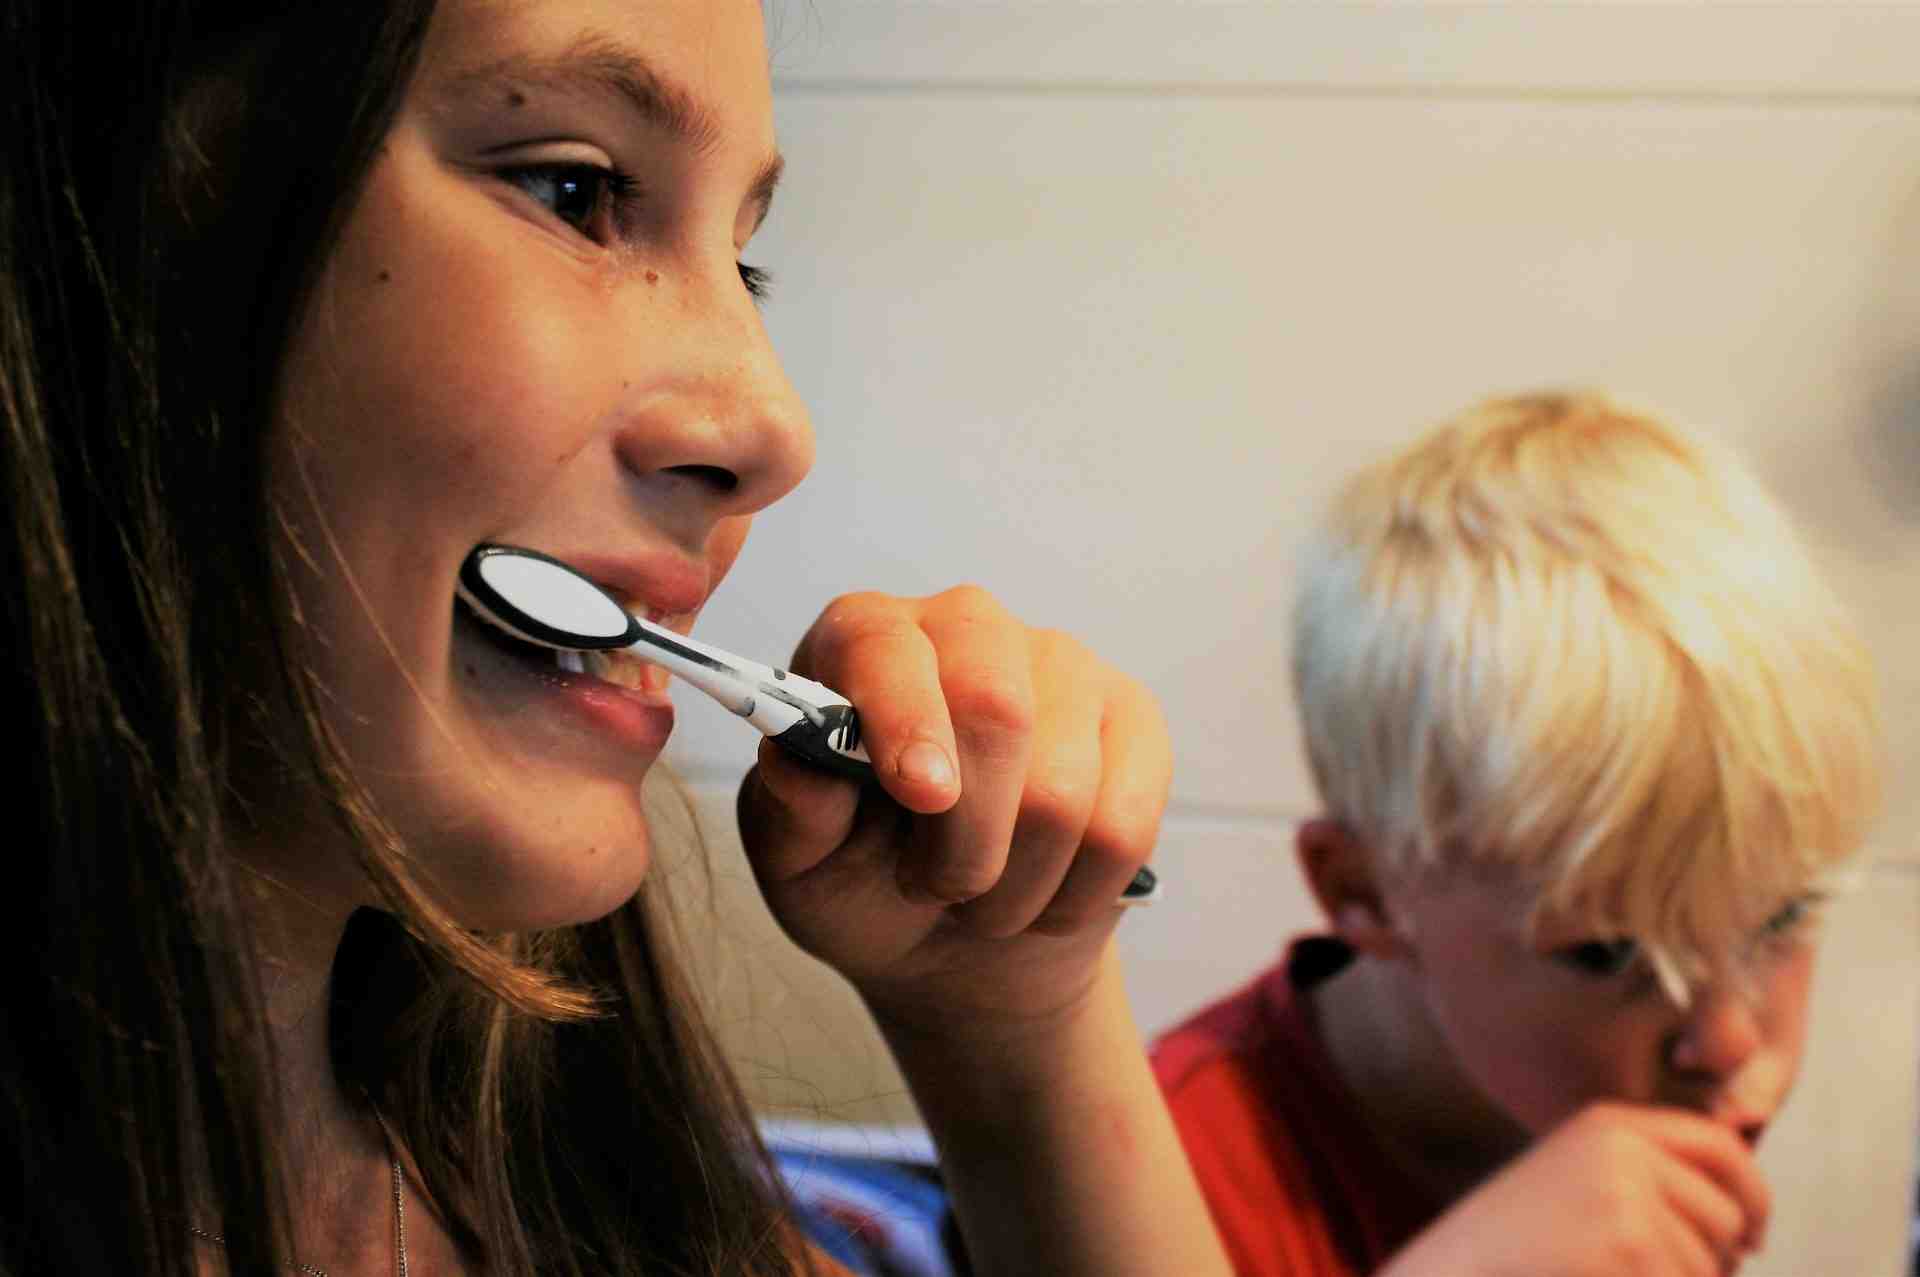 Is it safe to sedate a child for dental work?